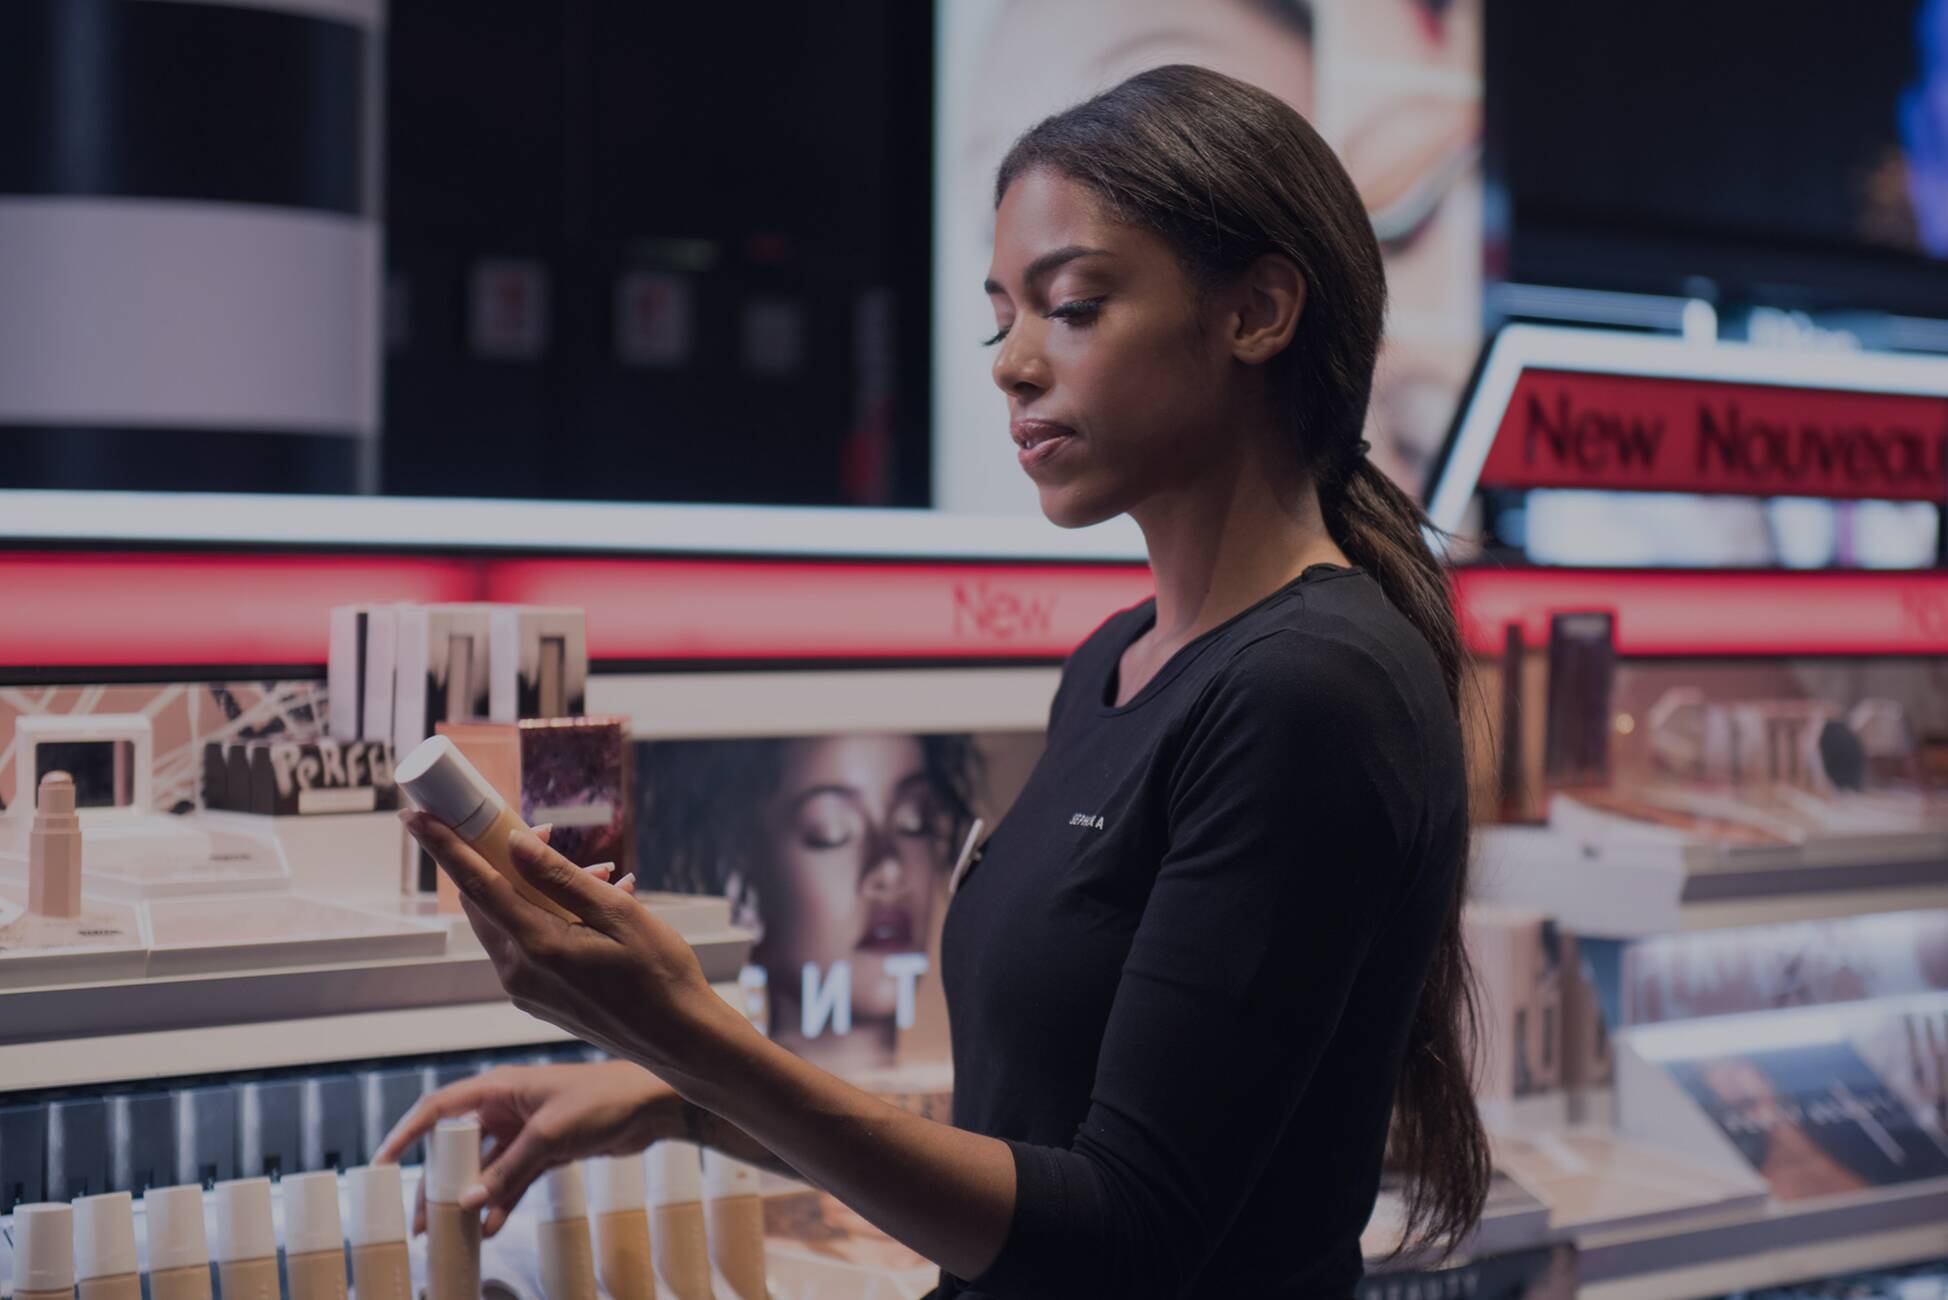 LVMH Counts On Sephora for Growth as Louis Vuitton Slows